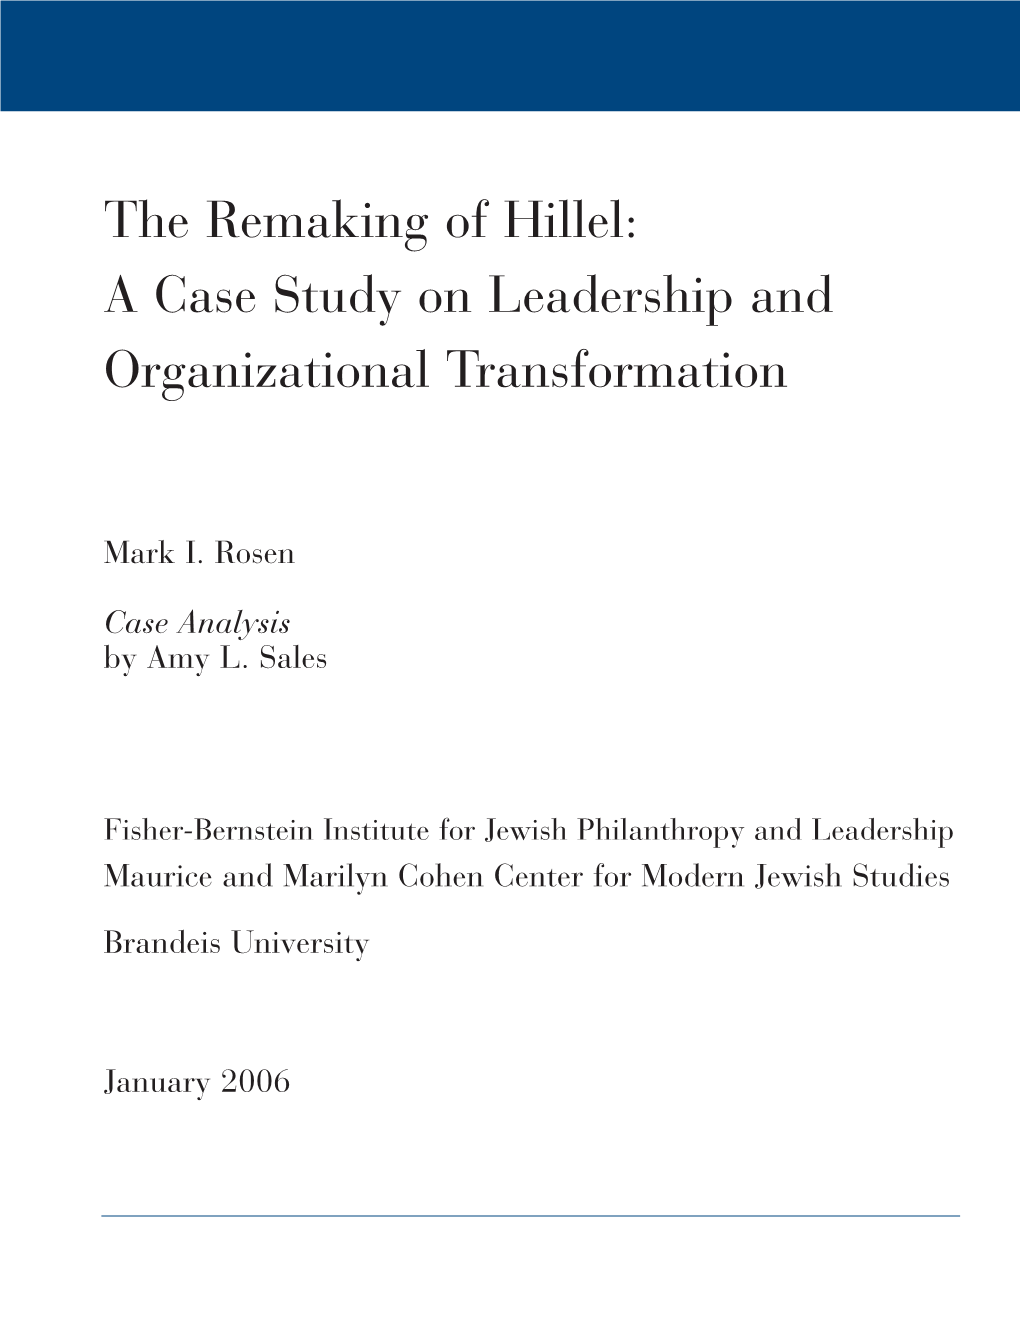 The Remaking of Hillel: a Case Study on Leadership and Organizational Transformation